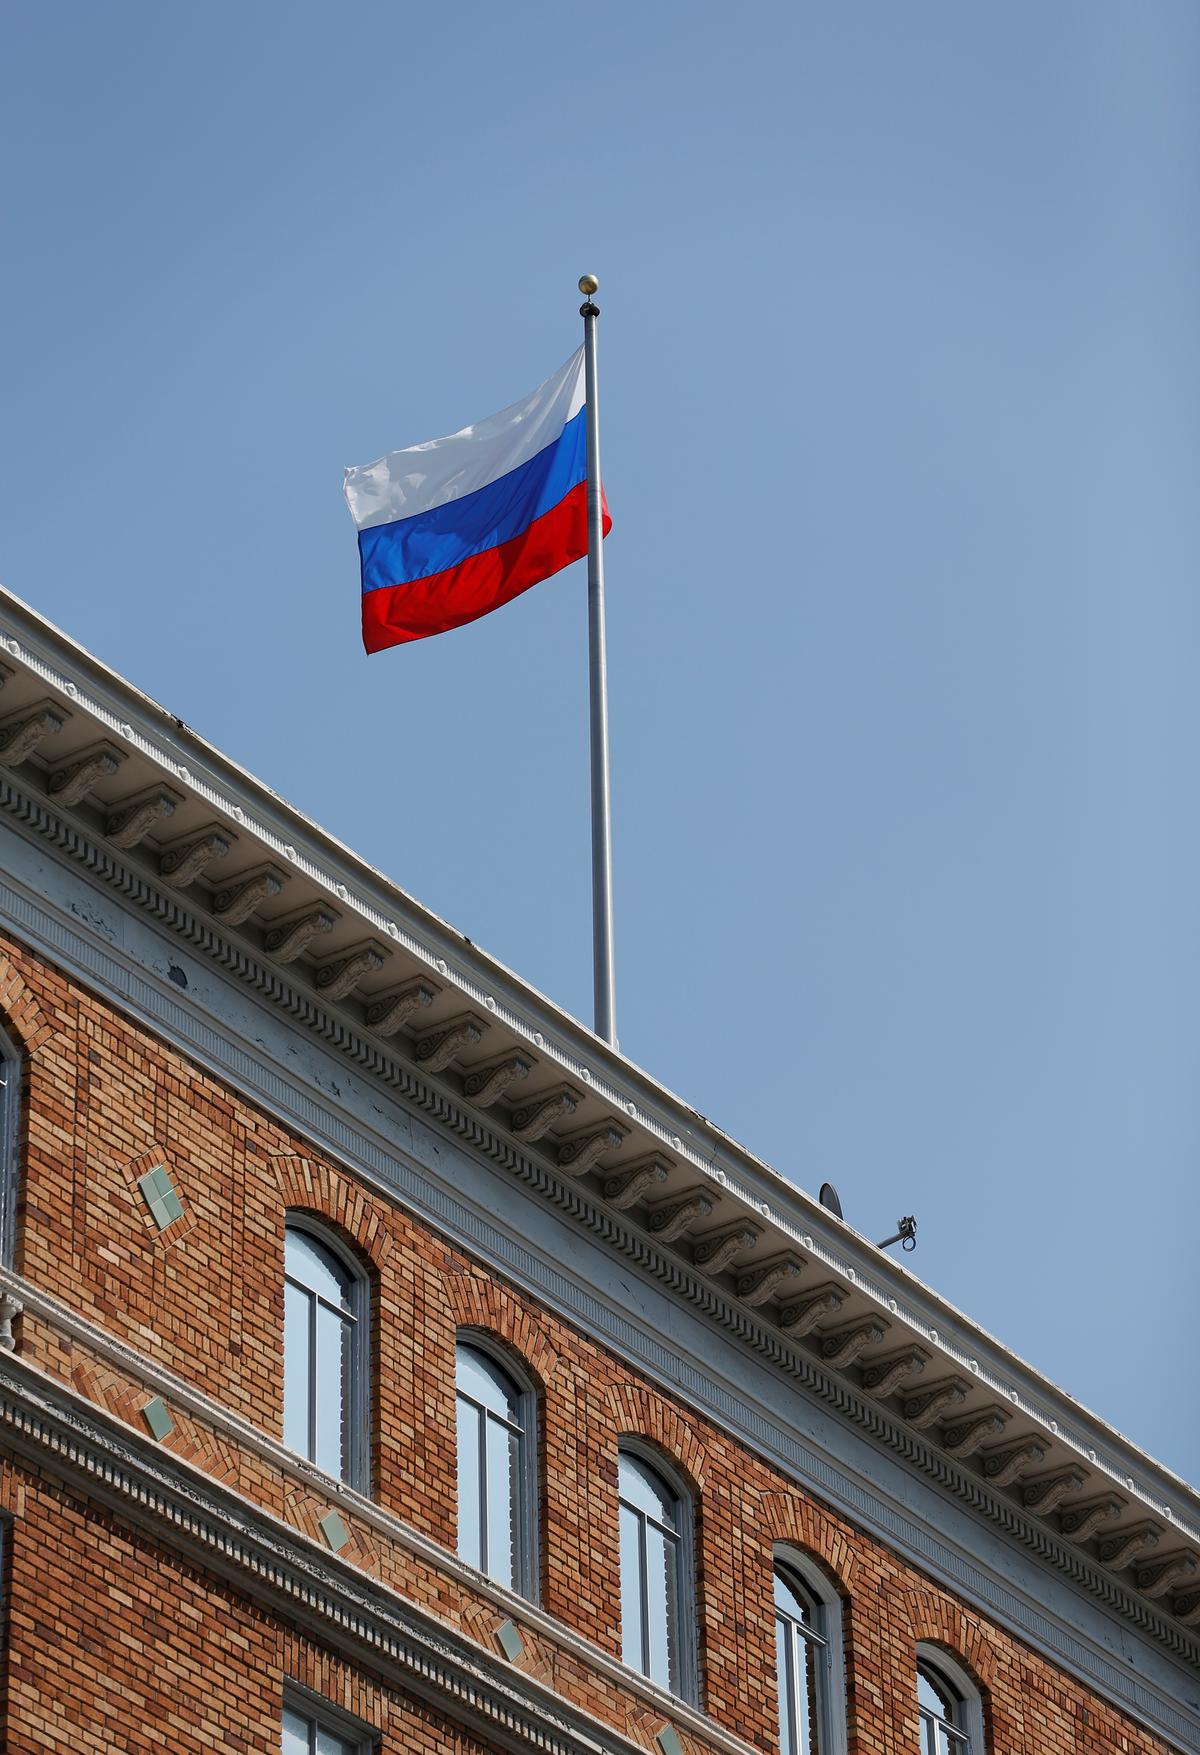 The Russian flag waves in the wind on the rooftop of the Consulate General of Russia in San Francisco, Calif., on Aug. 31, 2017. (REUTERS/Stephen Lam)